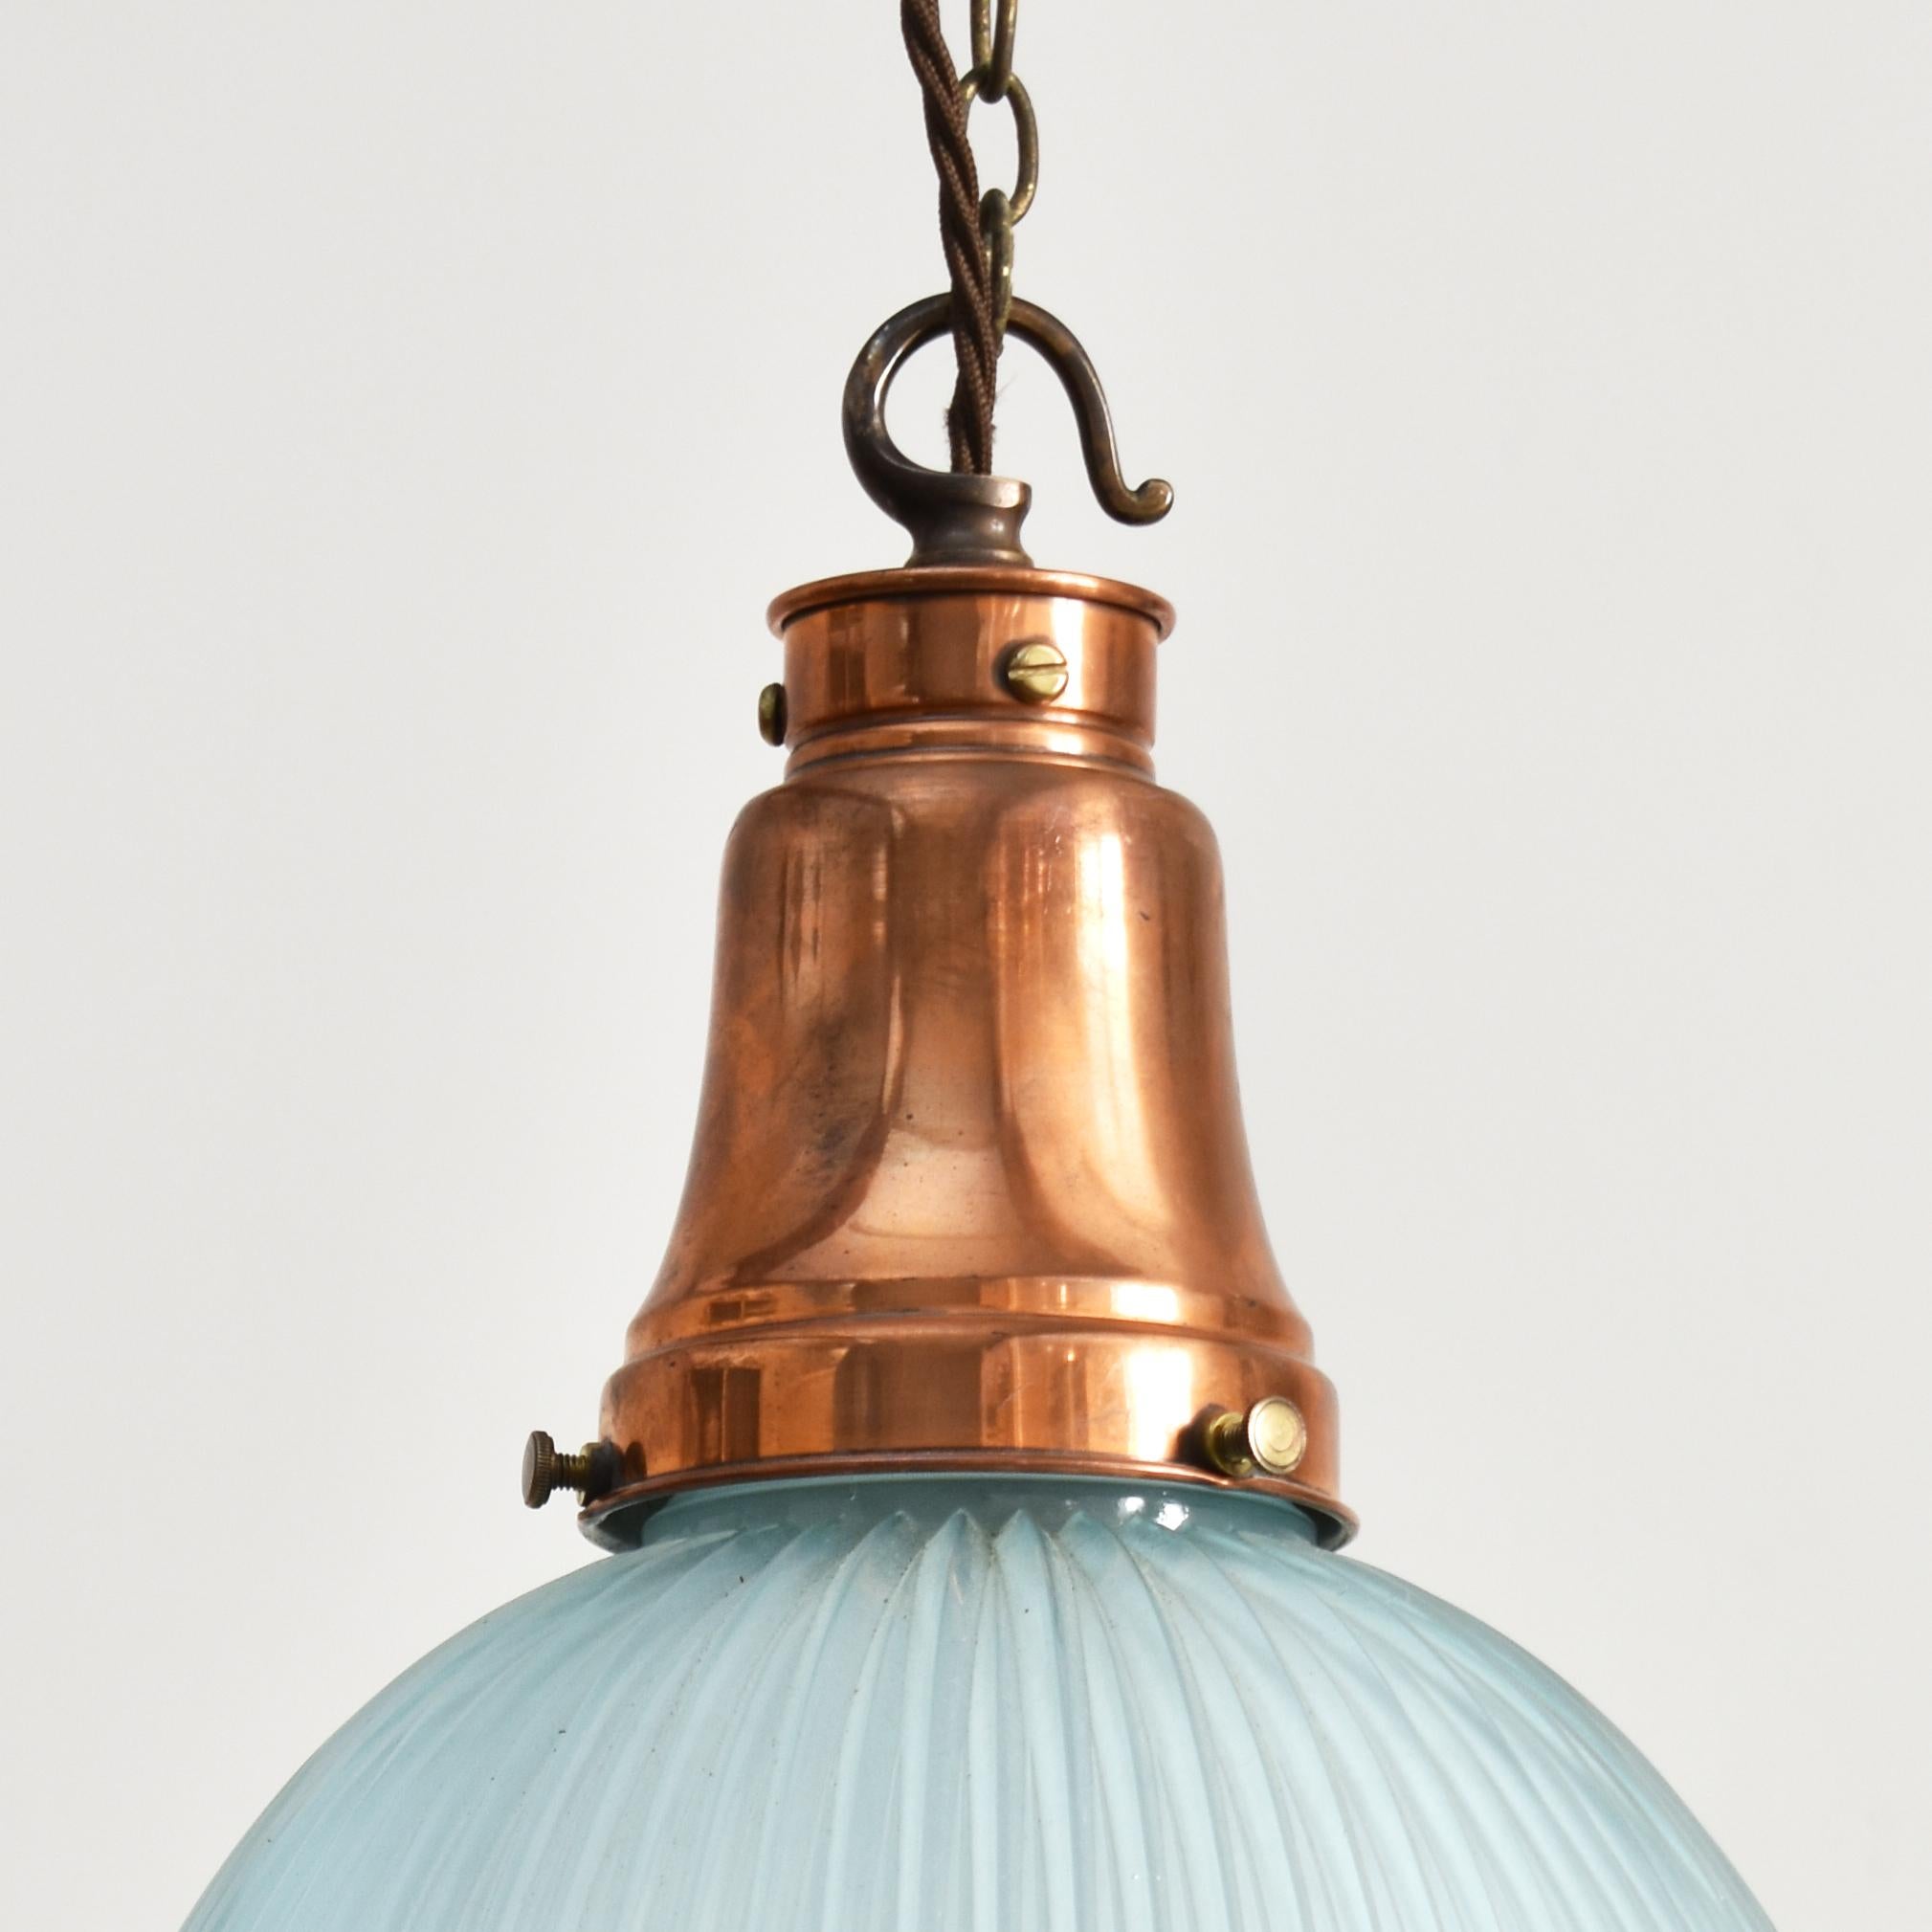 Antique Holophane Pendant Light – Blue Tint – A

A vintage bell pendant glass light Manufactured by ‘Holophane’ in an unusual blue glass colour variation. The light has a polished brass GEC gallery, stamped with the original makers mark